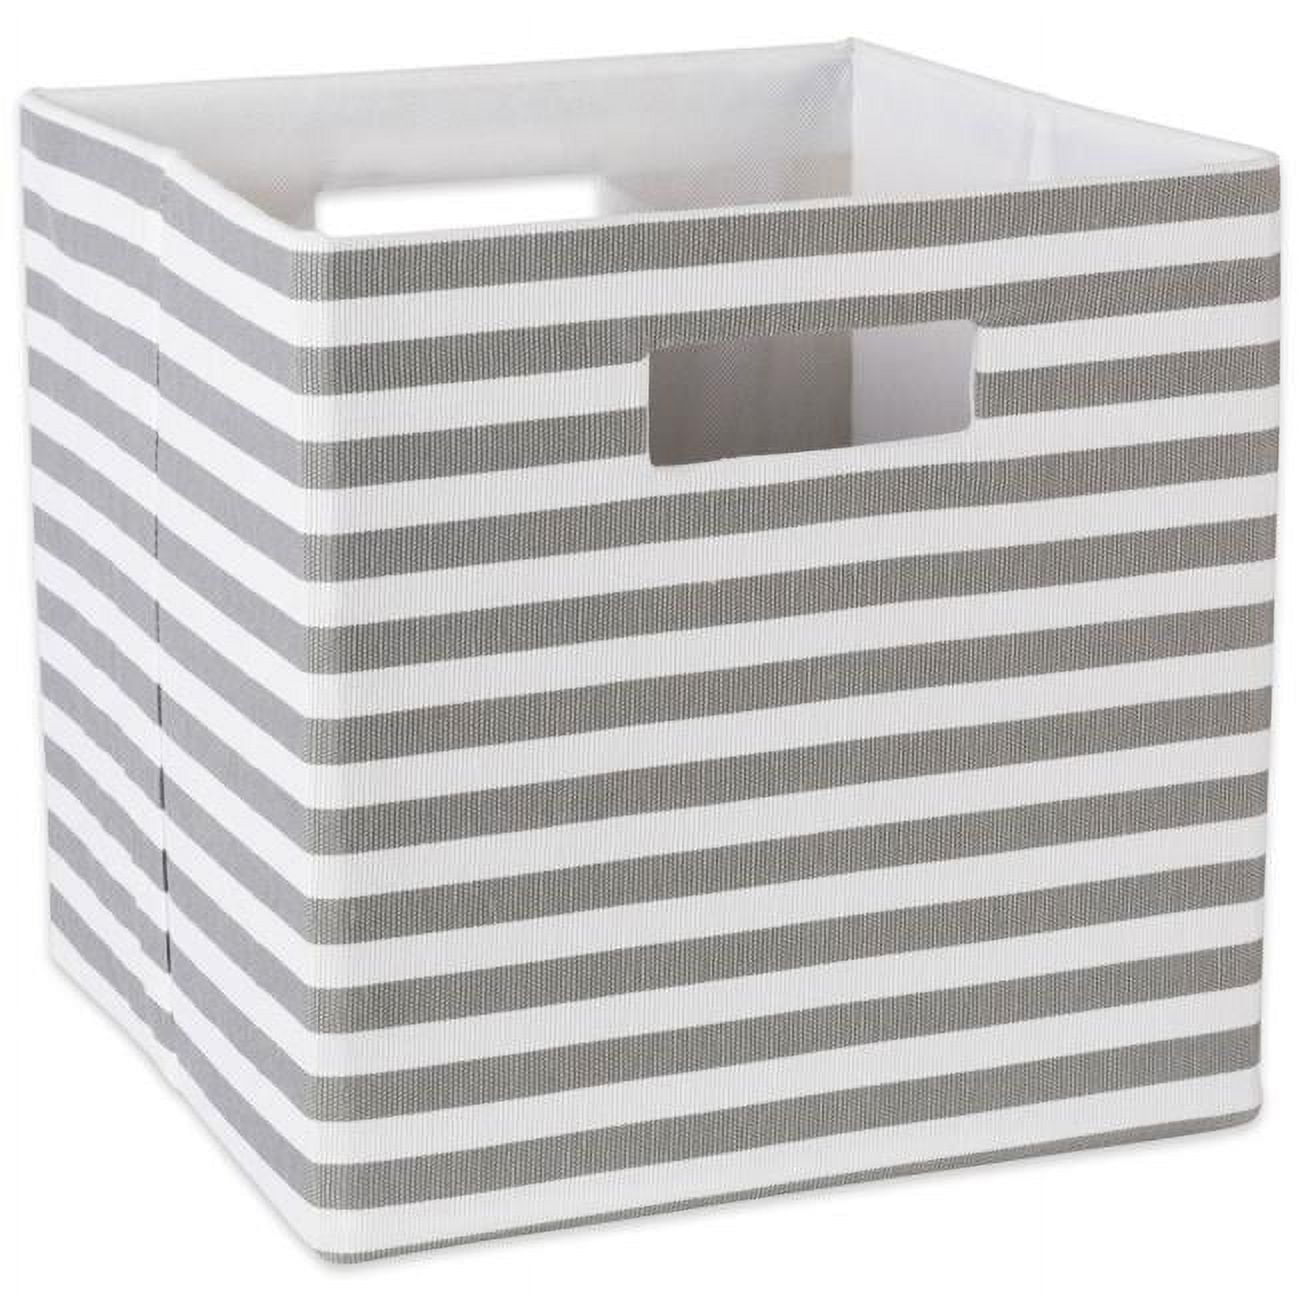 Design Imports Camz10603 13 X 13 X 13 In. Pinstripe Square Polyester Storage Cube, Grey